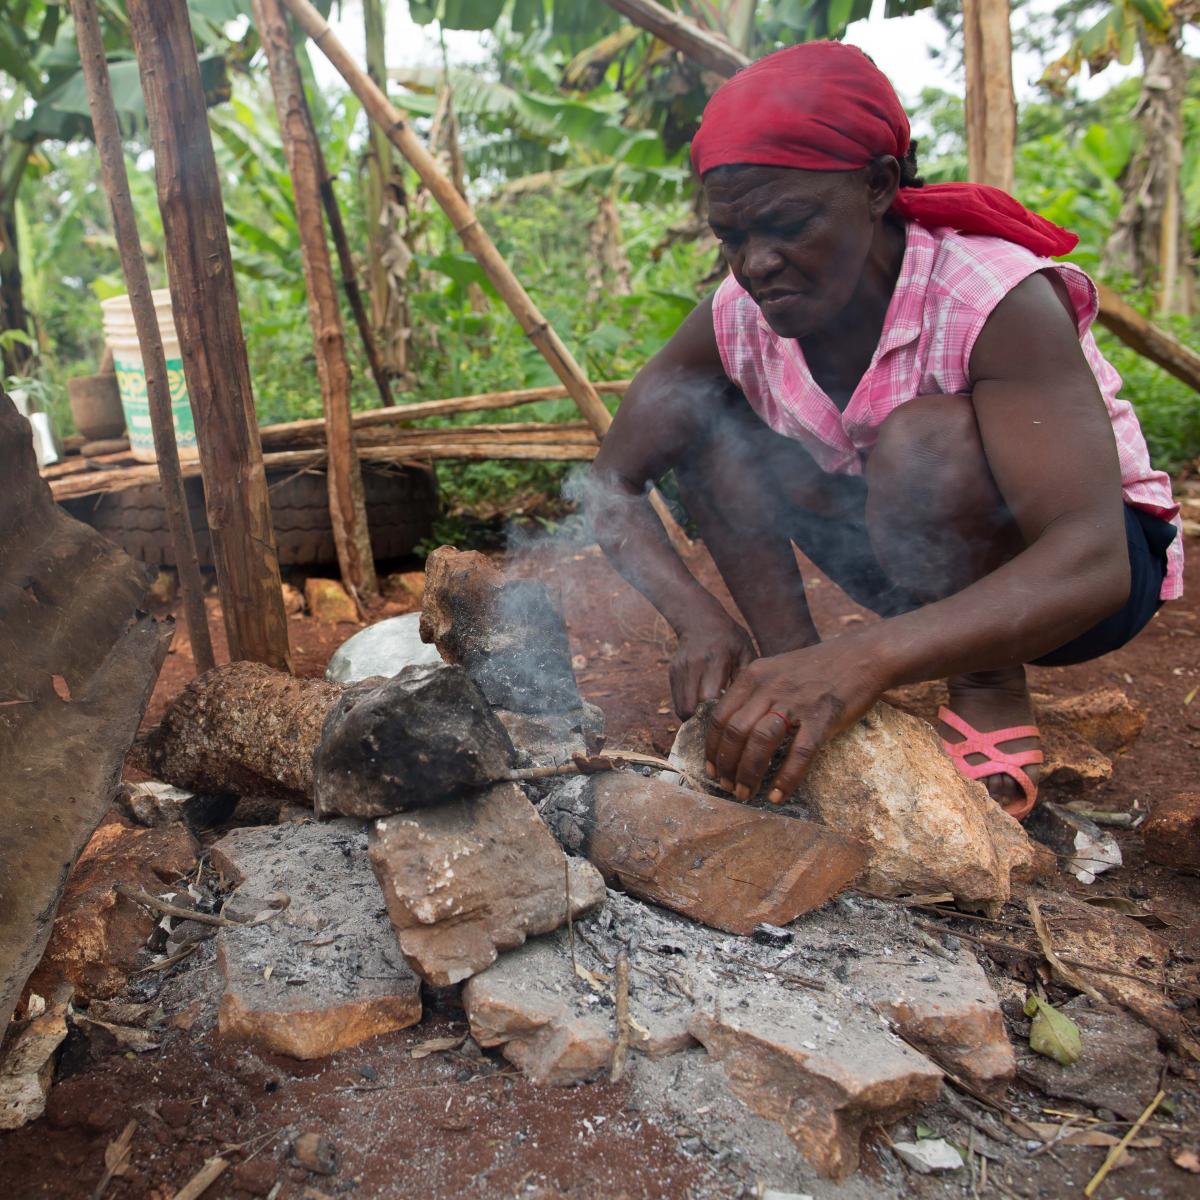 Marie Anna prepares a meal for her family